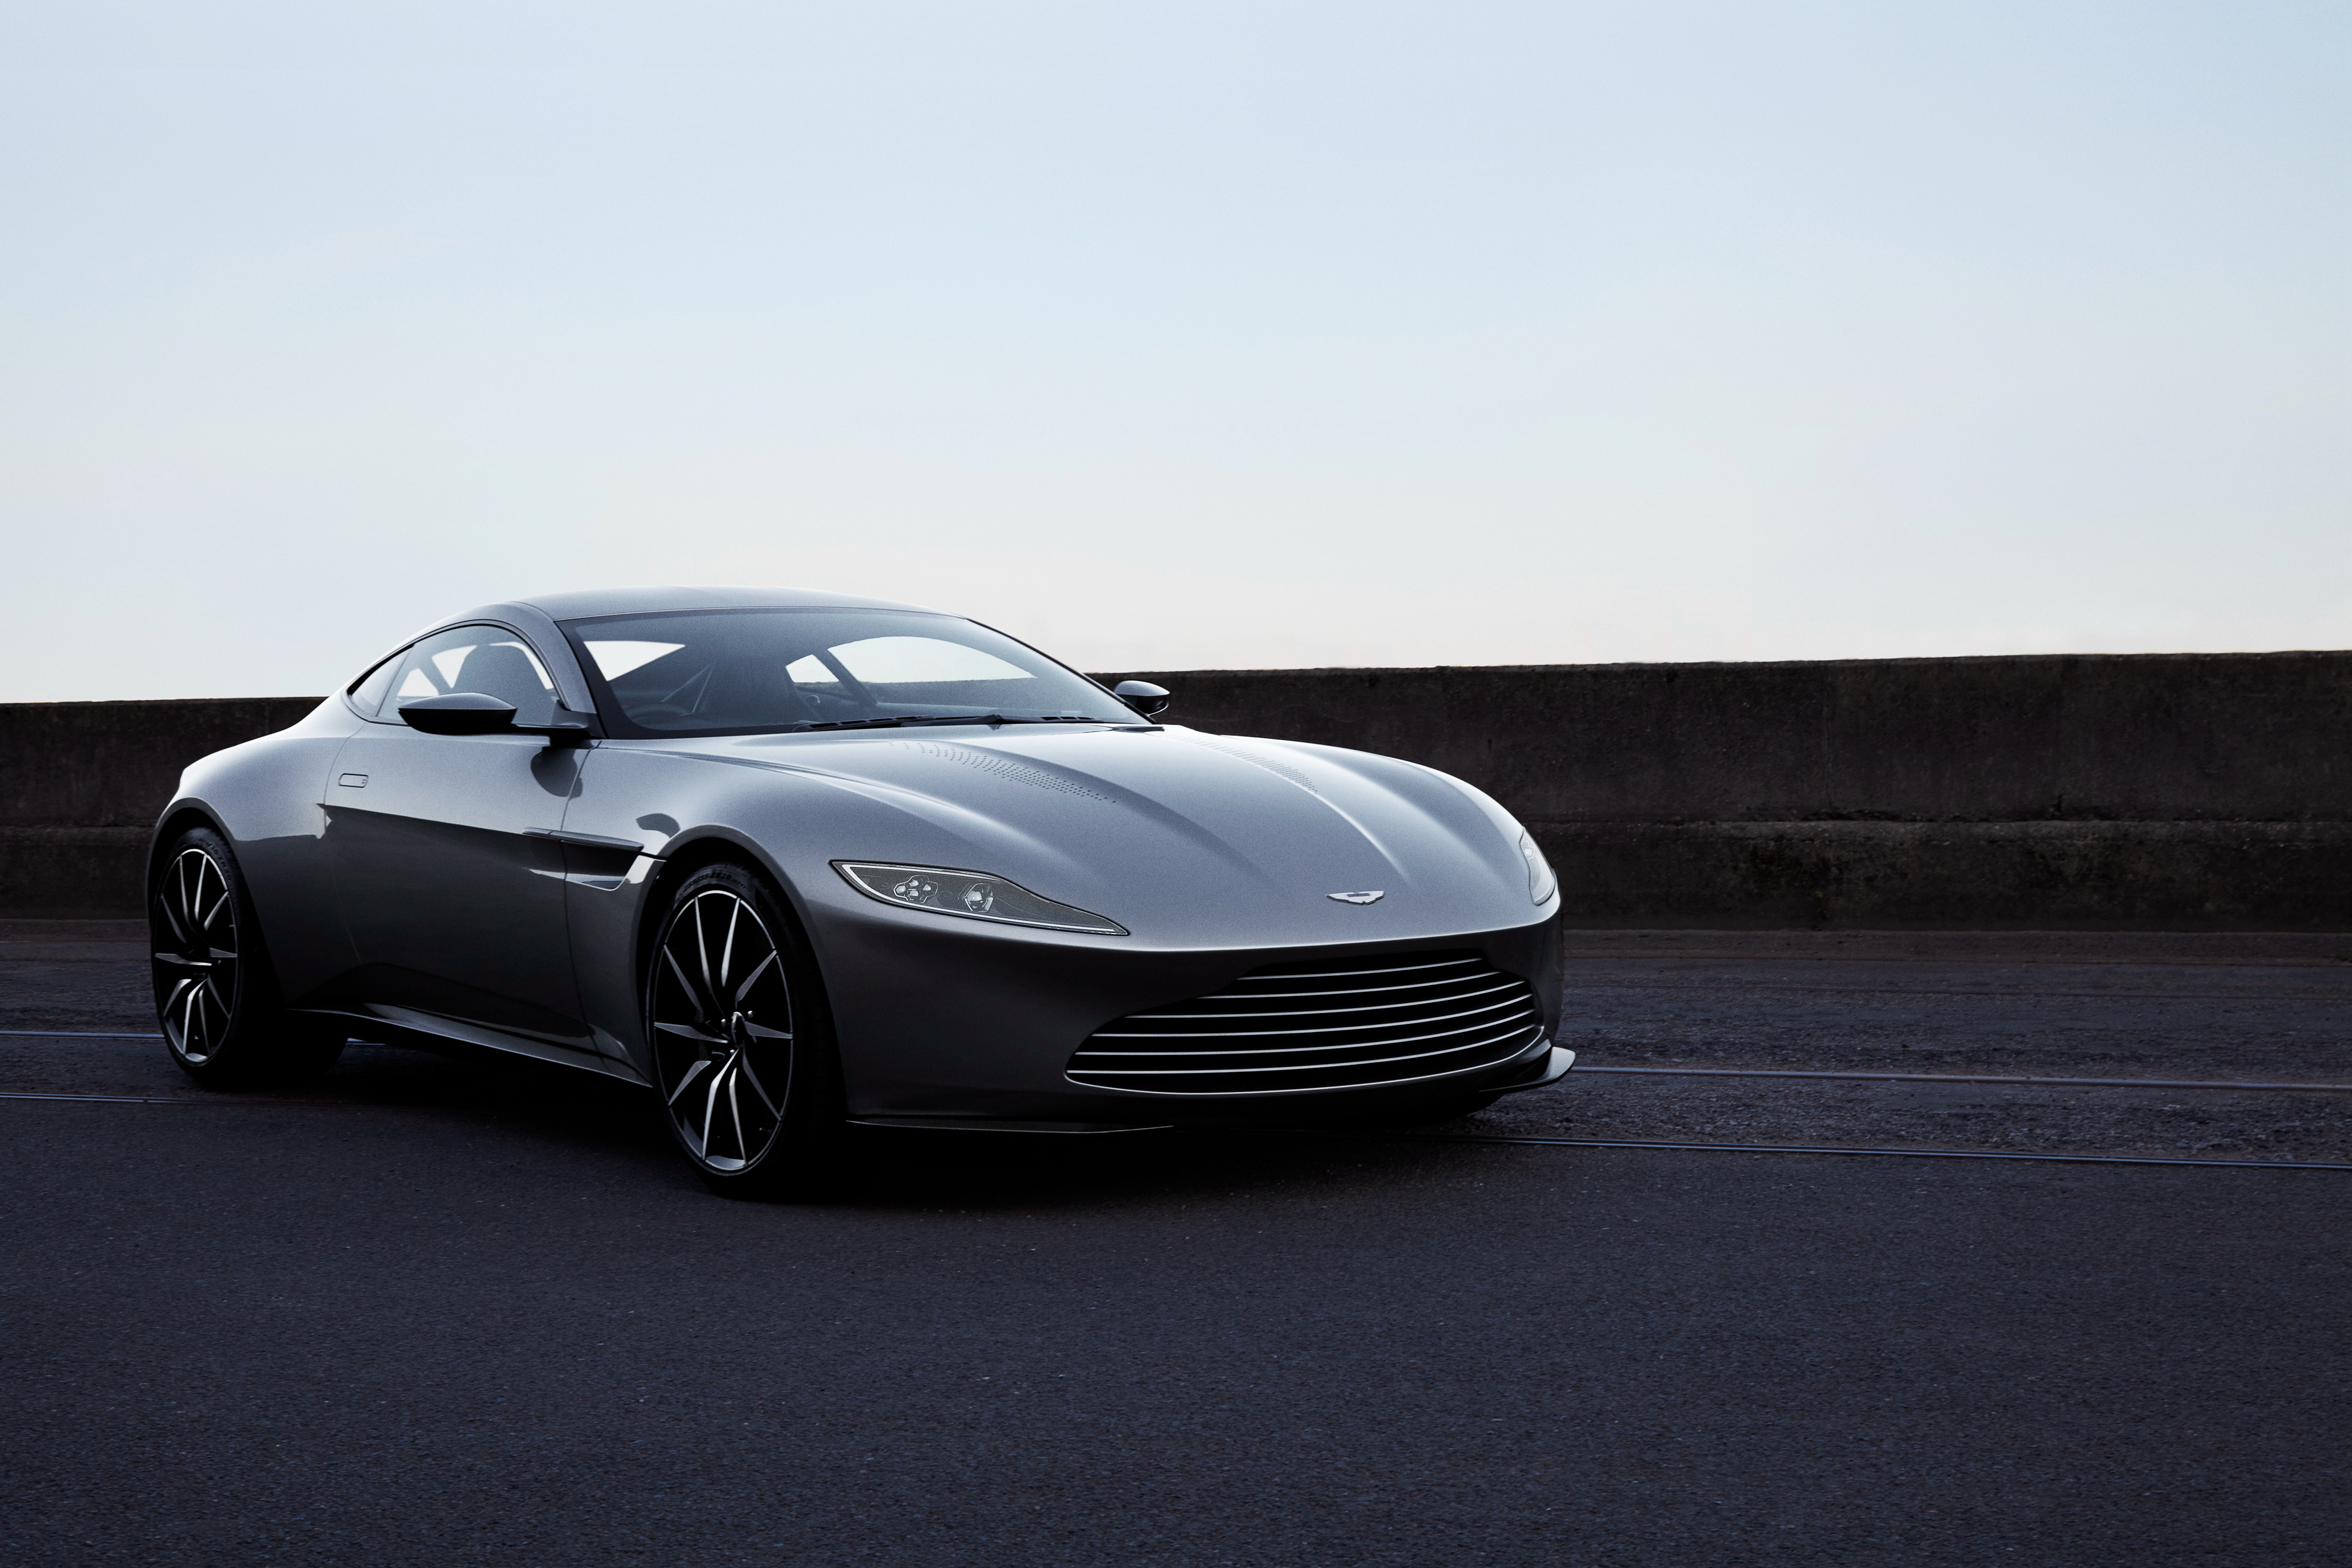 aston martin, cars, side view, silver, silvery, db10 iphone wallpaper